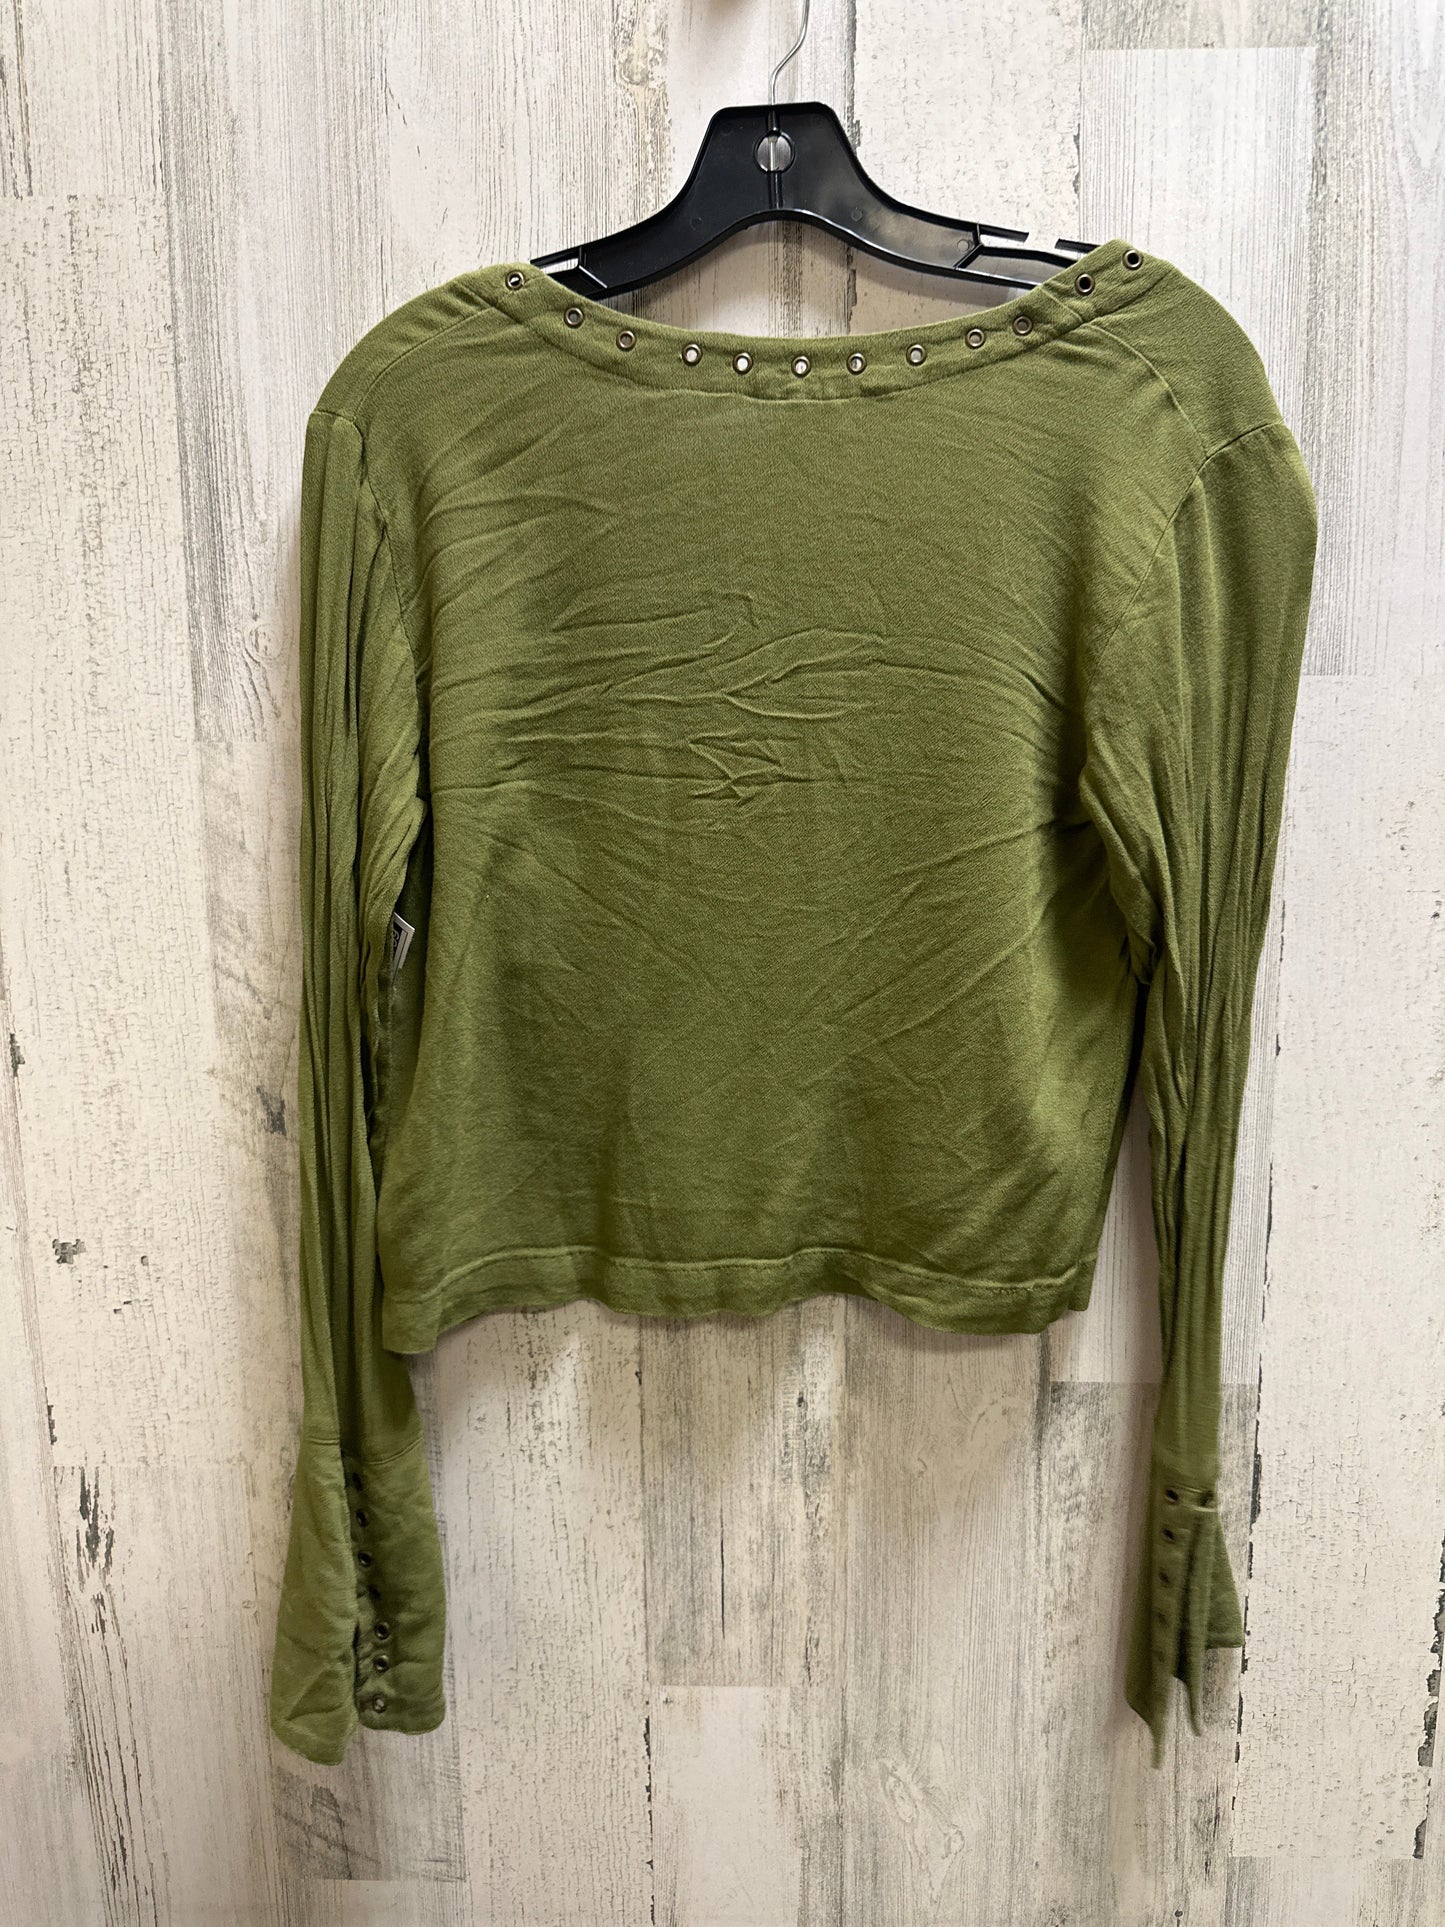 Green Top Long Sleeve Free People, Size Xs